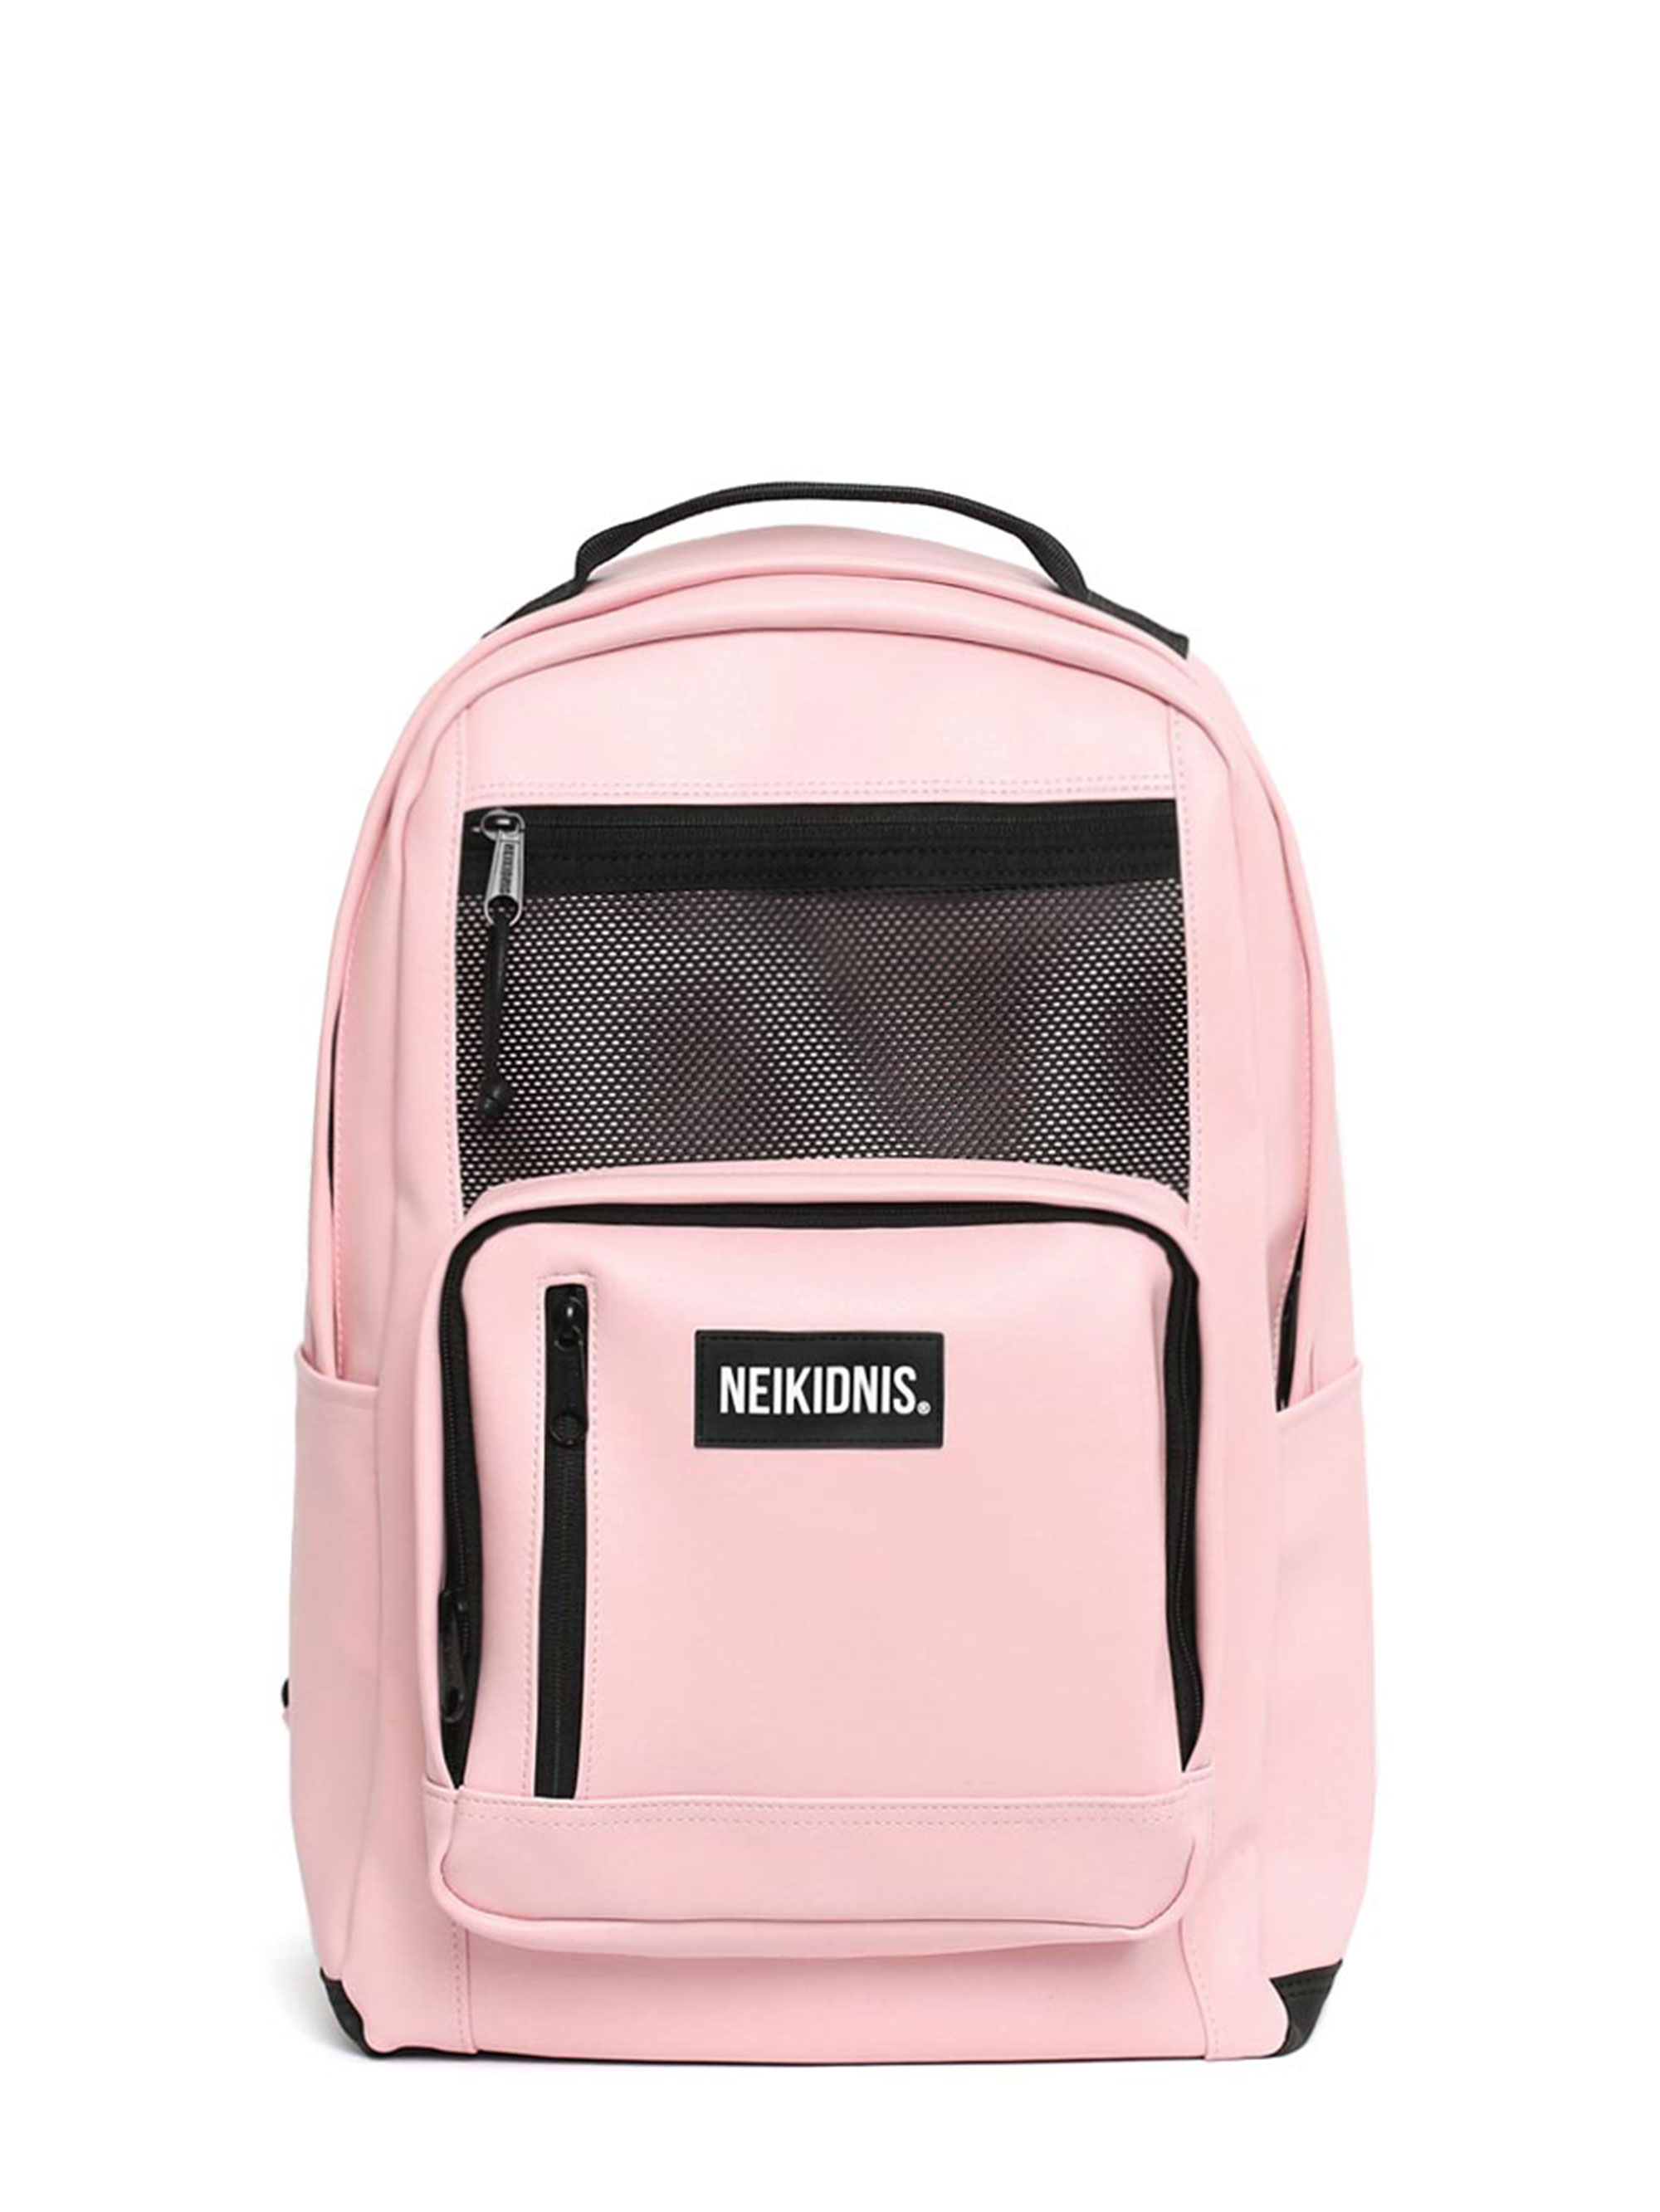 PRIME BACKPACK / LEATHER PINK - NKNS